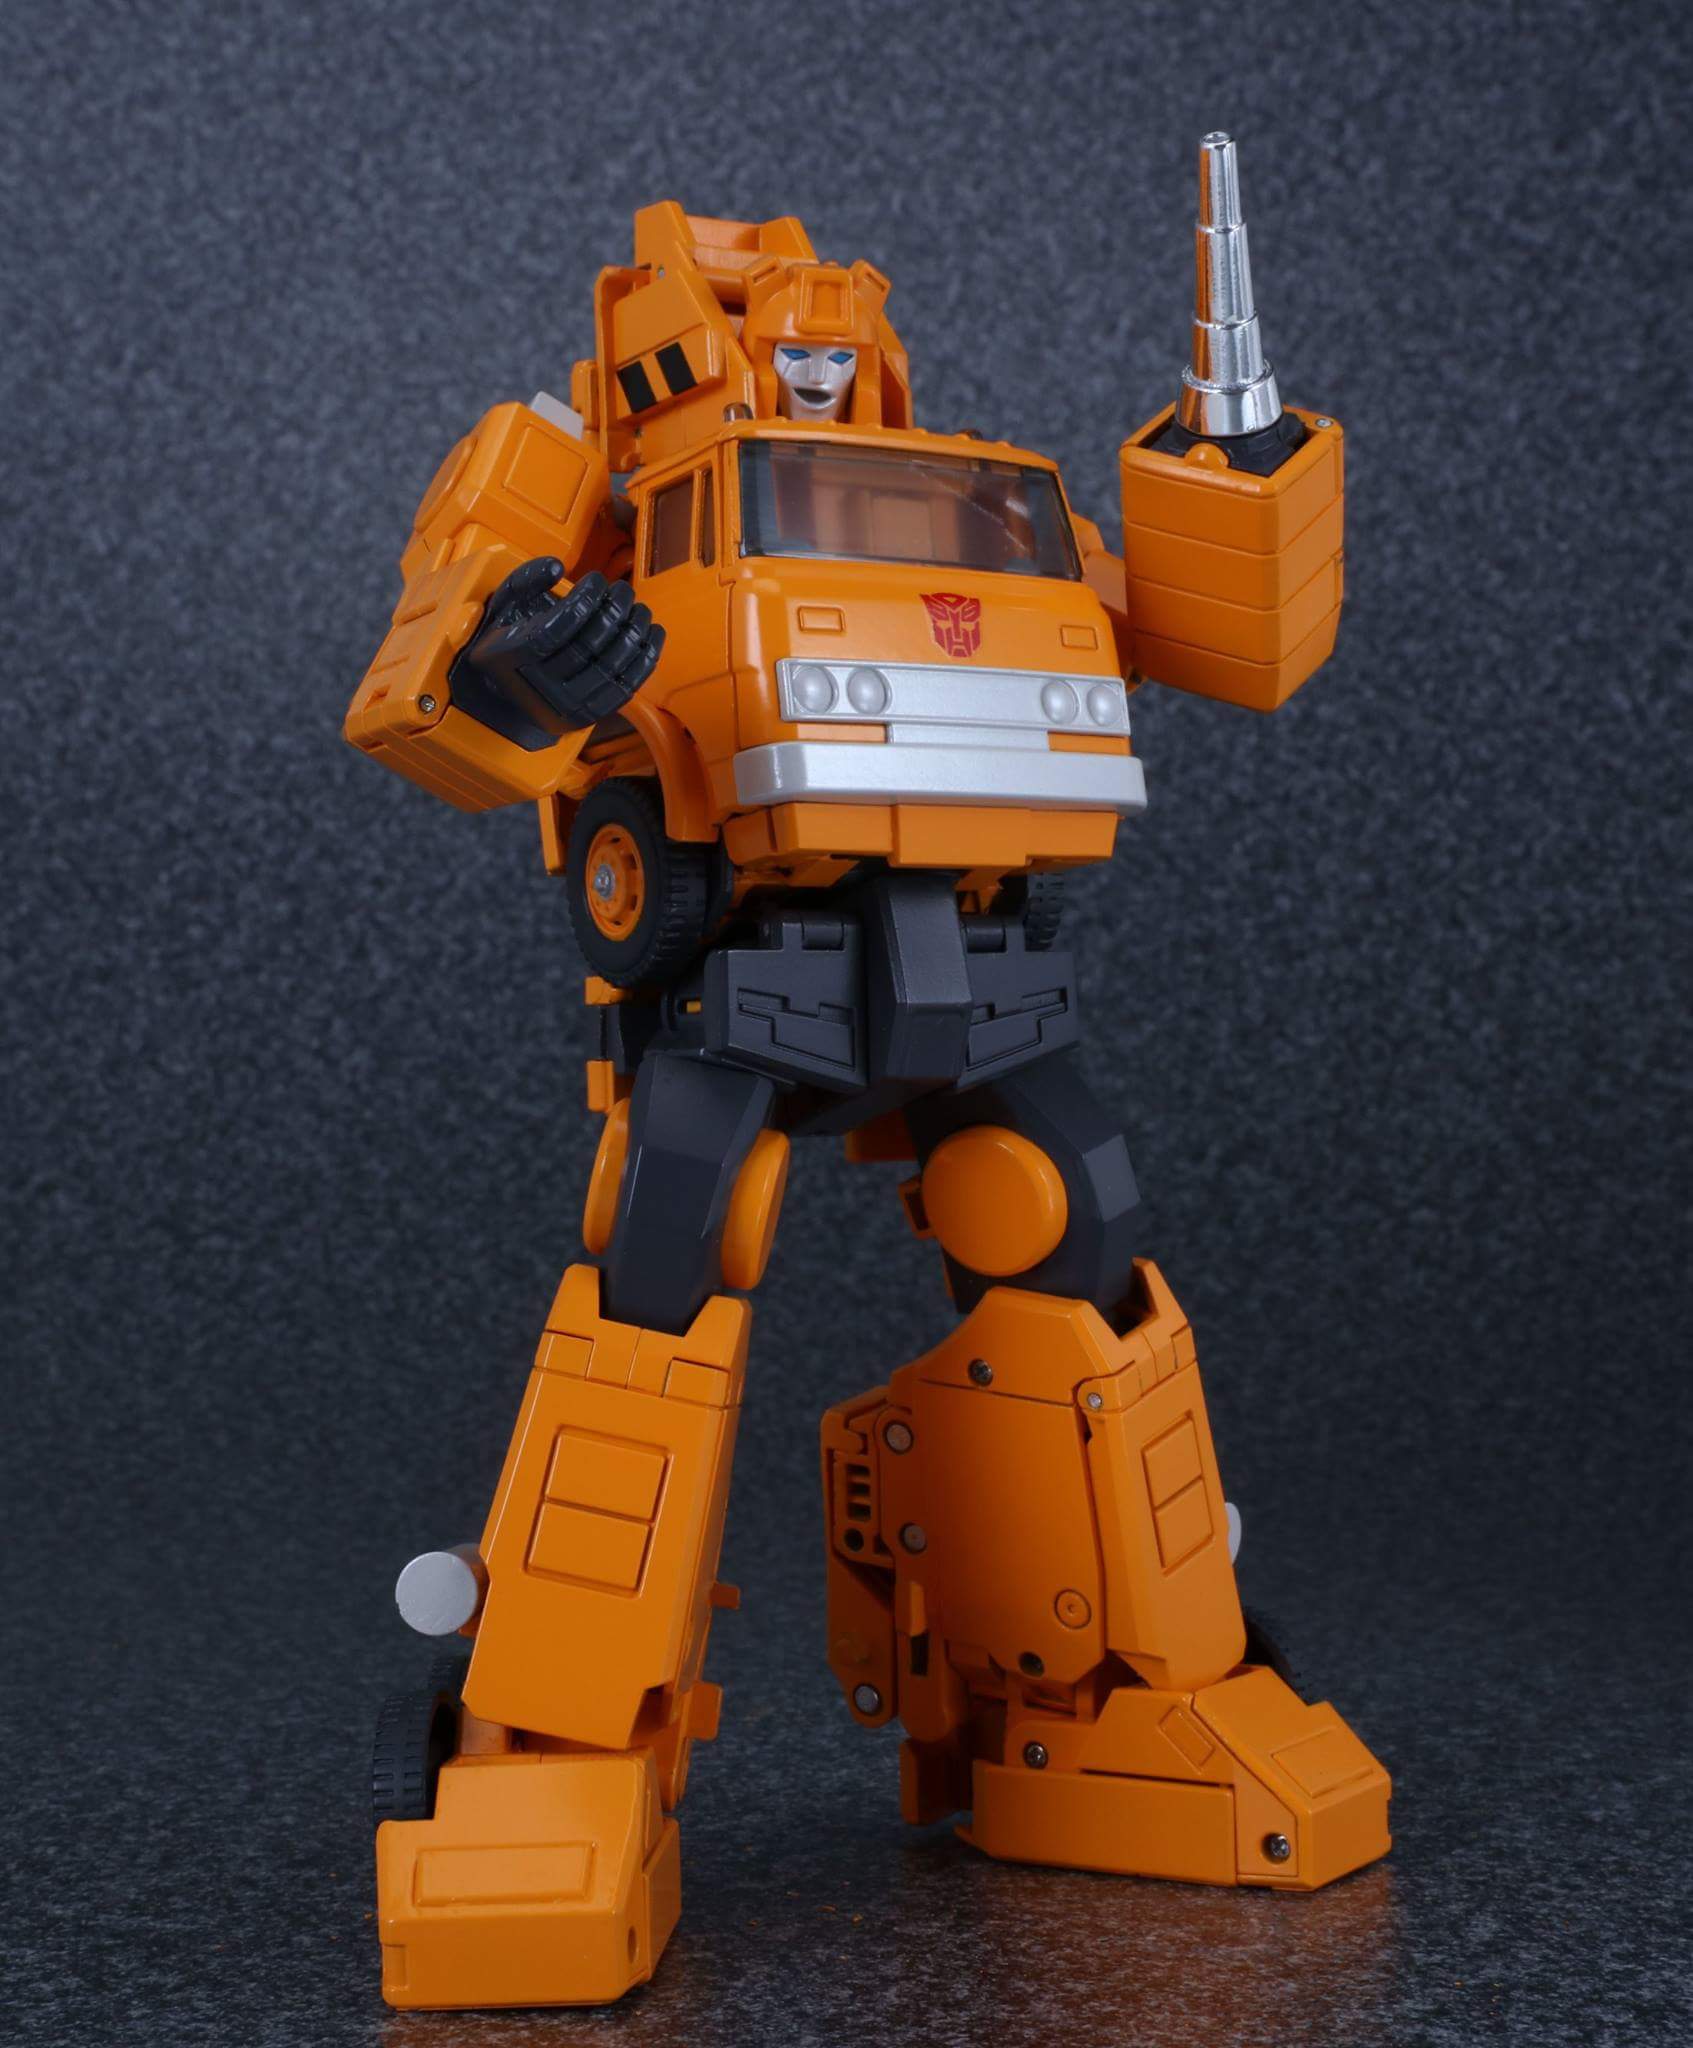 [Masterpiece] MP-35 Grapple/Grappin 7cJfMadD